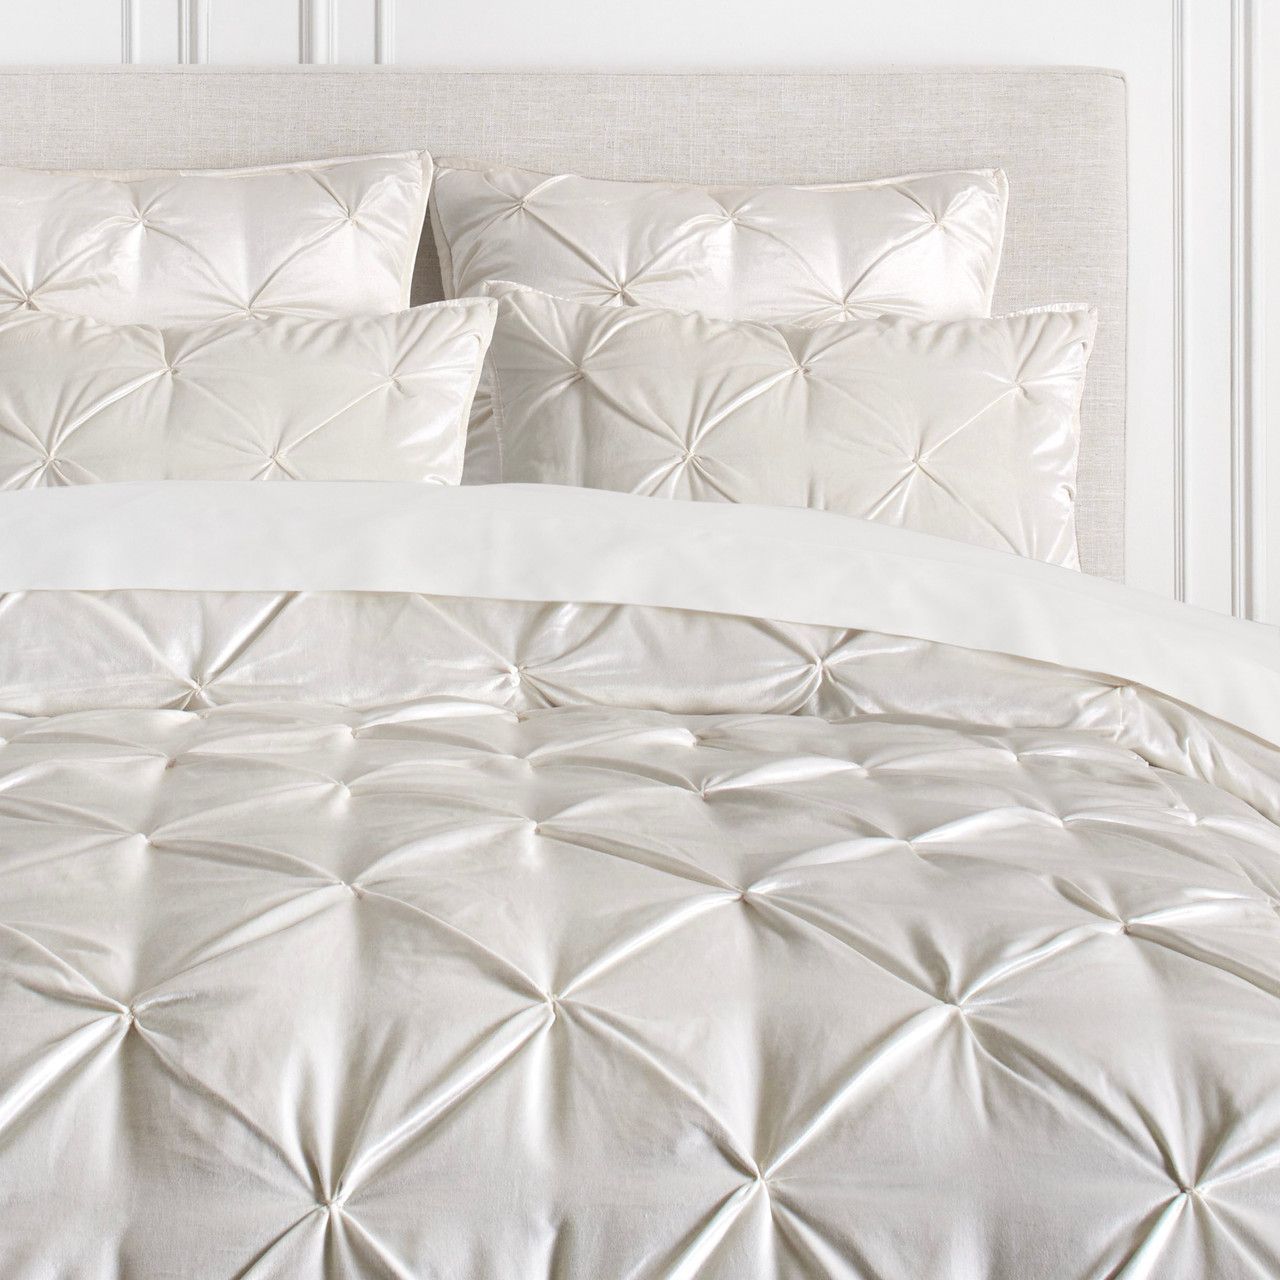 Avignon Bedding - Pearl soft - Home finds amazon essentials target finds zgallerie finds glam | Z Gallerie